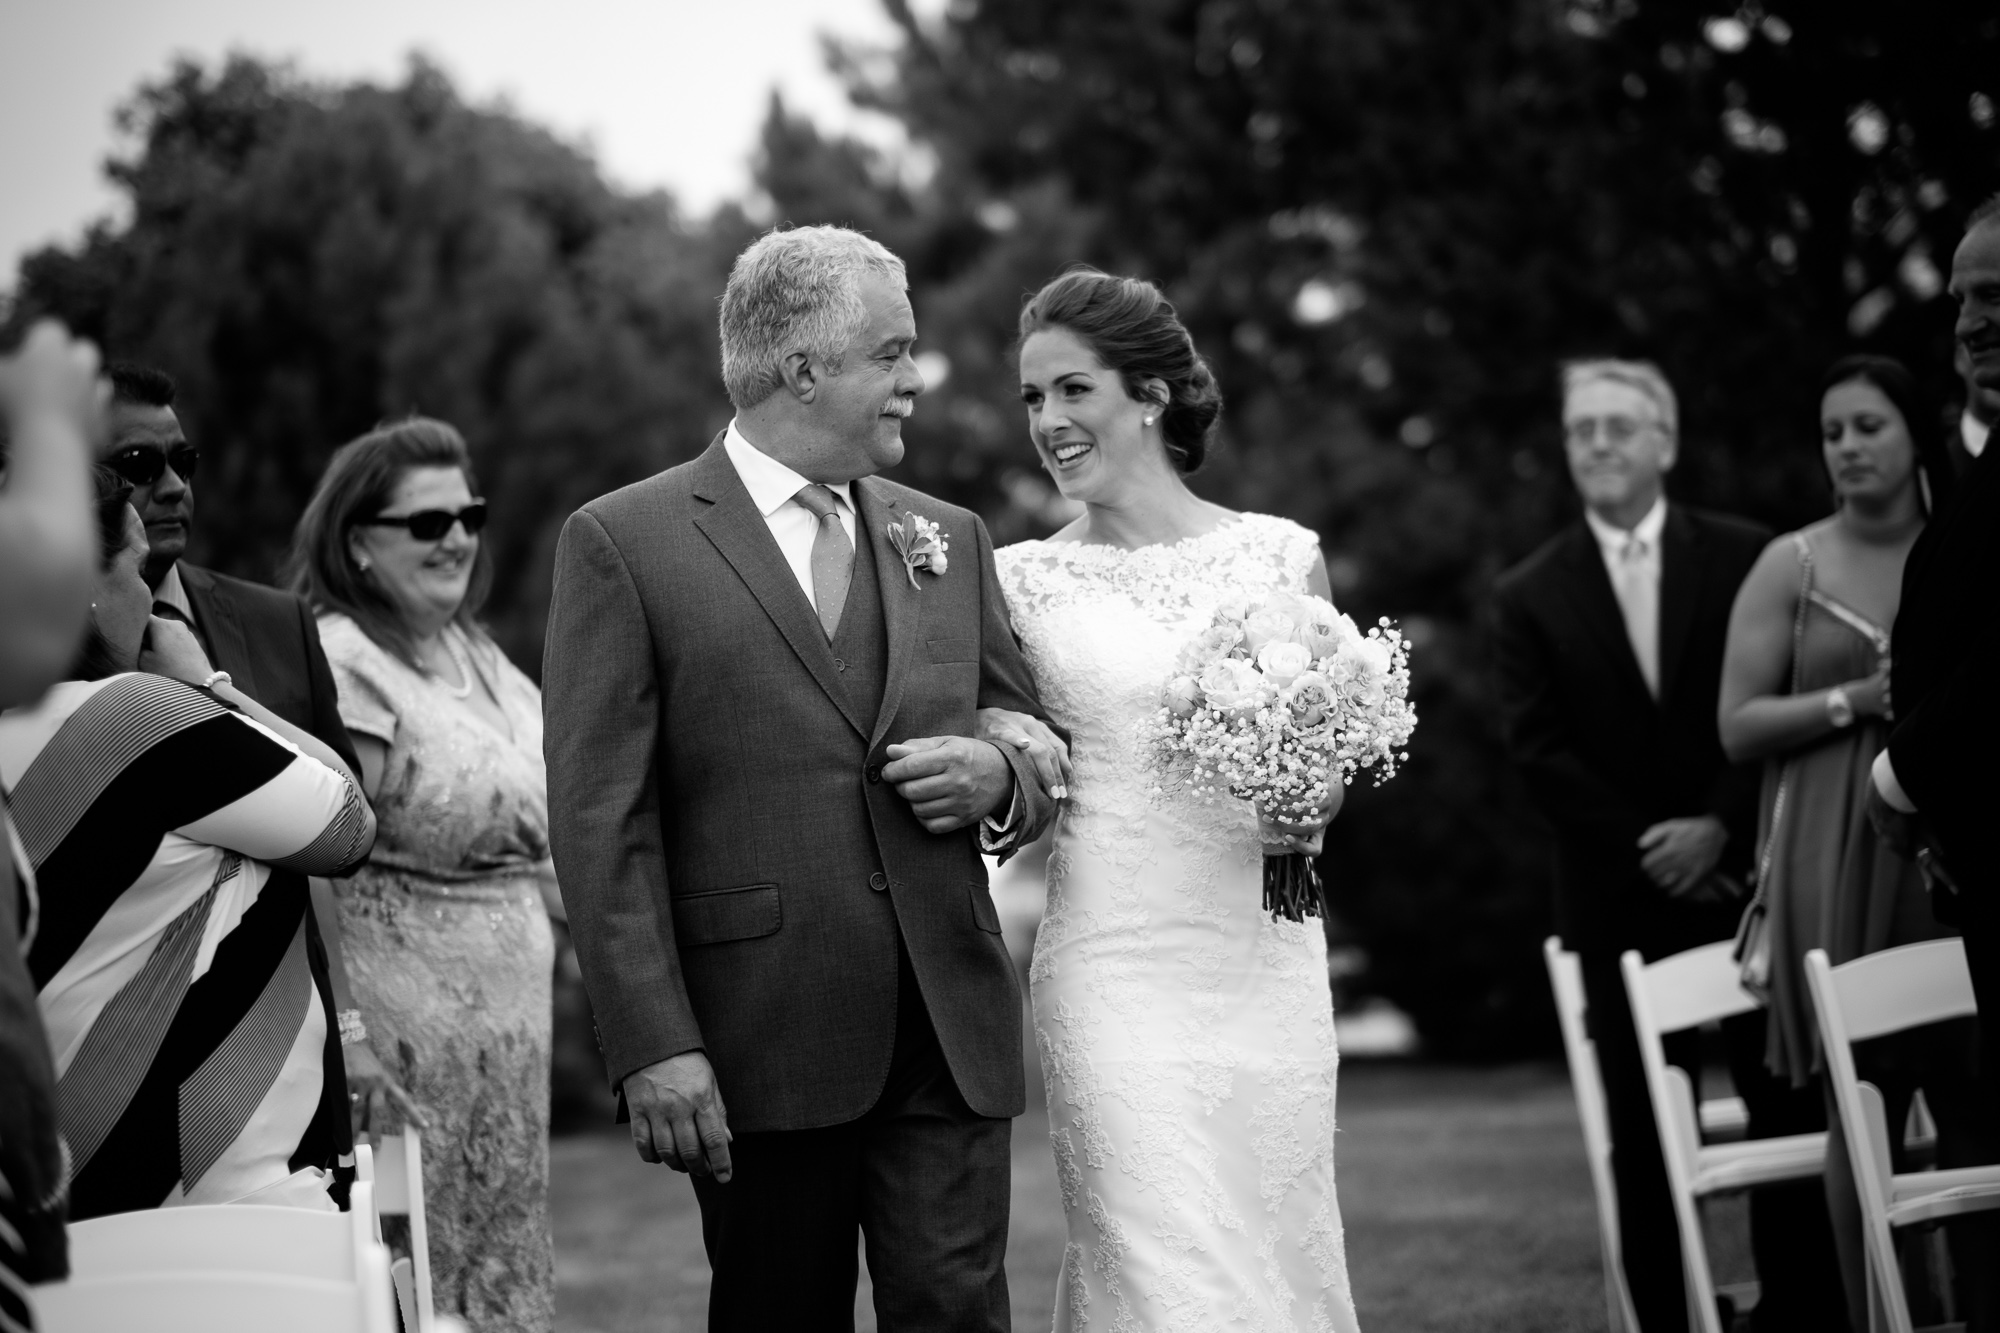  Rebecca and her father share a moment as they walk down the aisle during their outdoor wedding ceremony at the Hessenland Inn. 